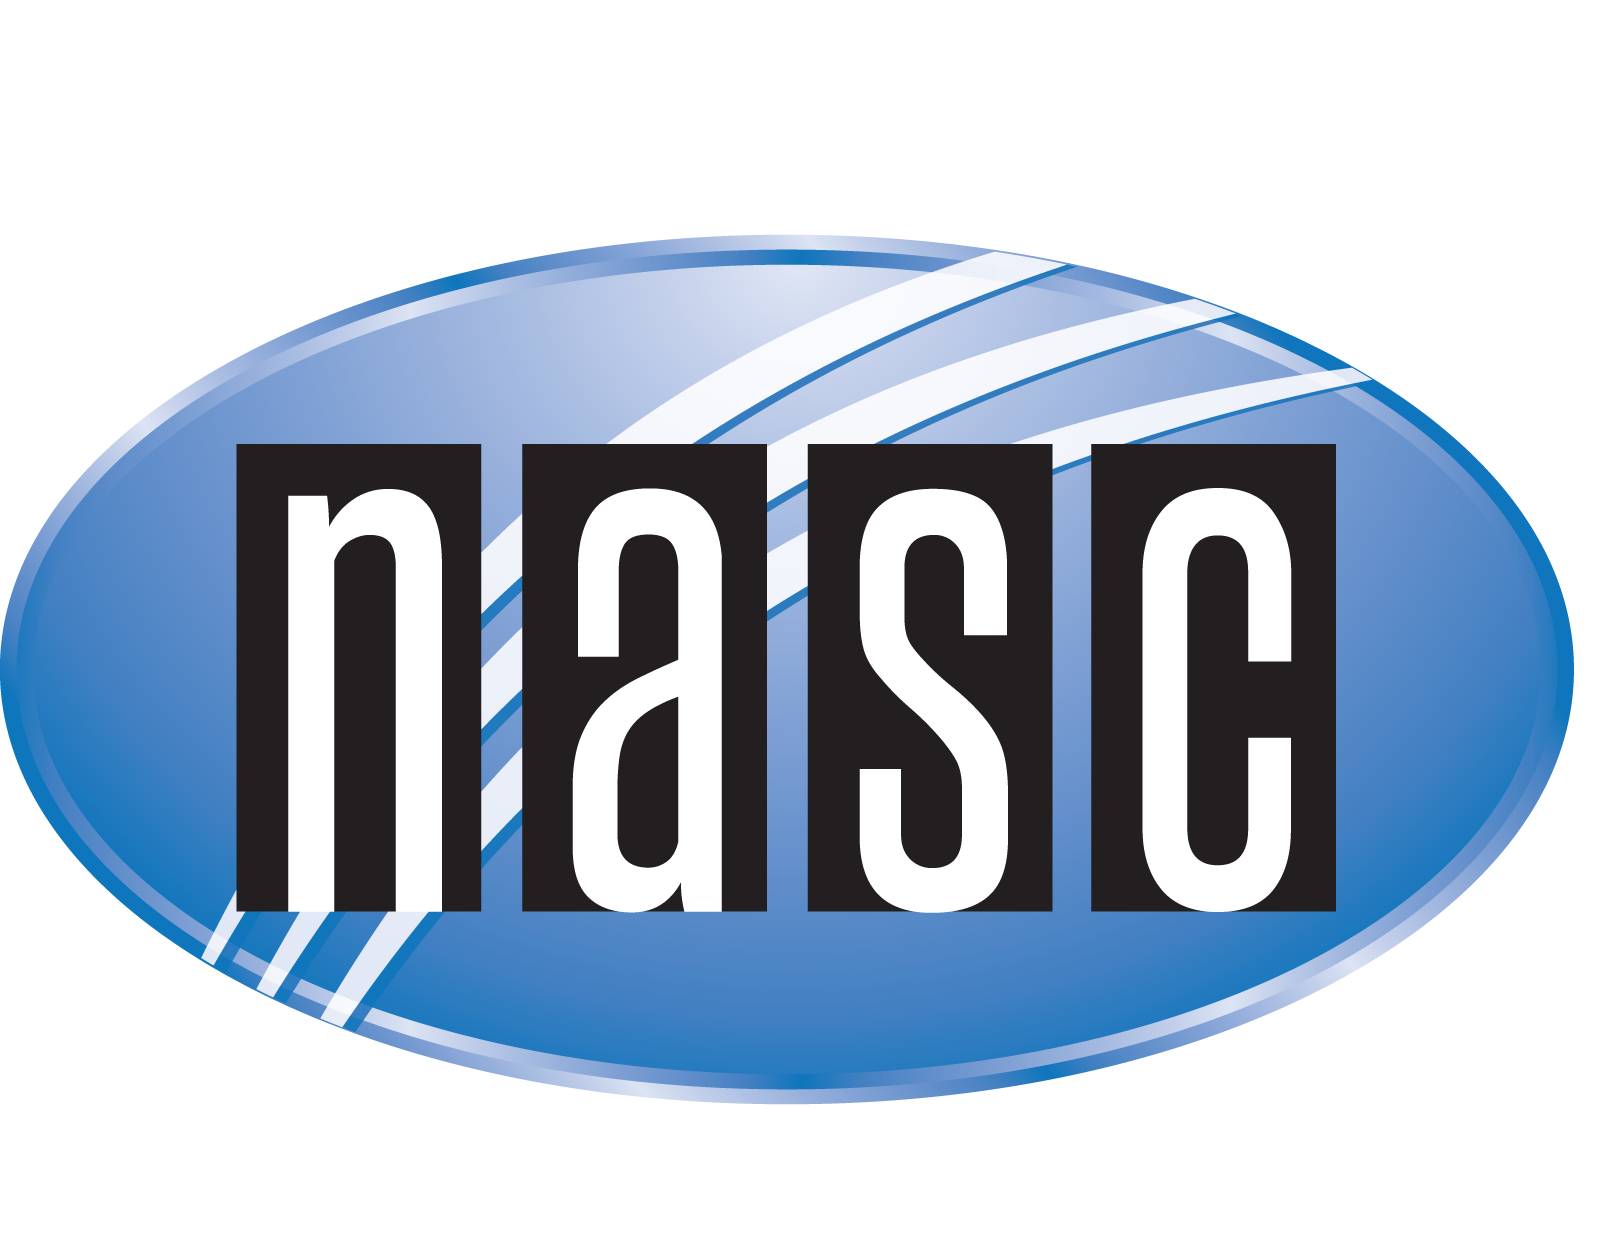 Vitalabs is a National Animal Supplement Council Preferred Supplier